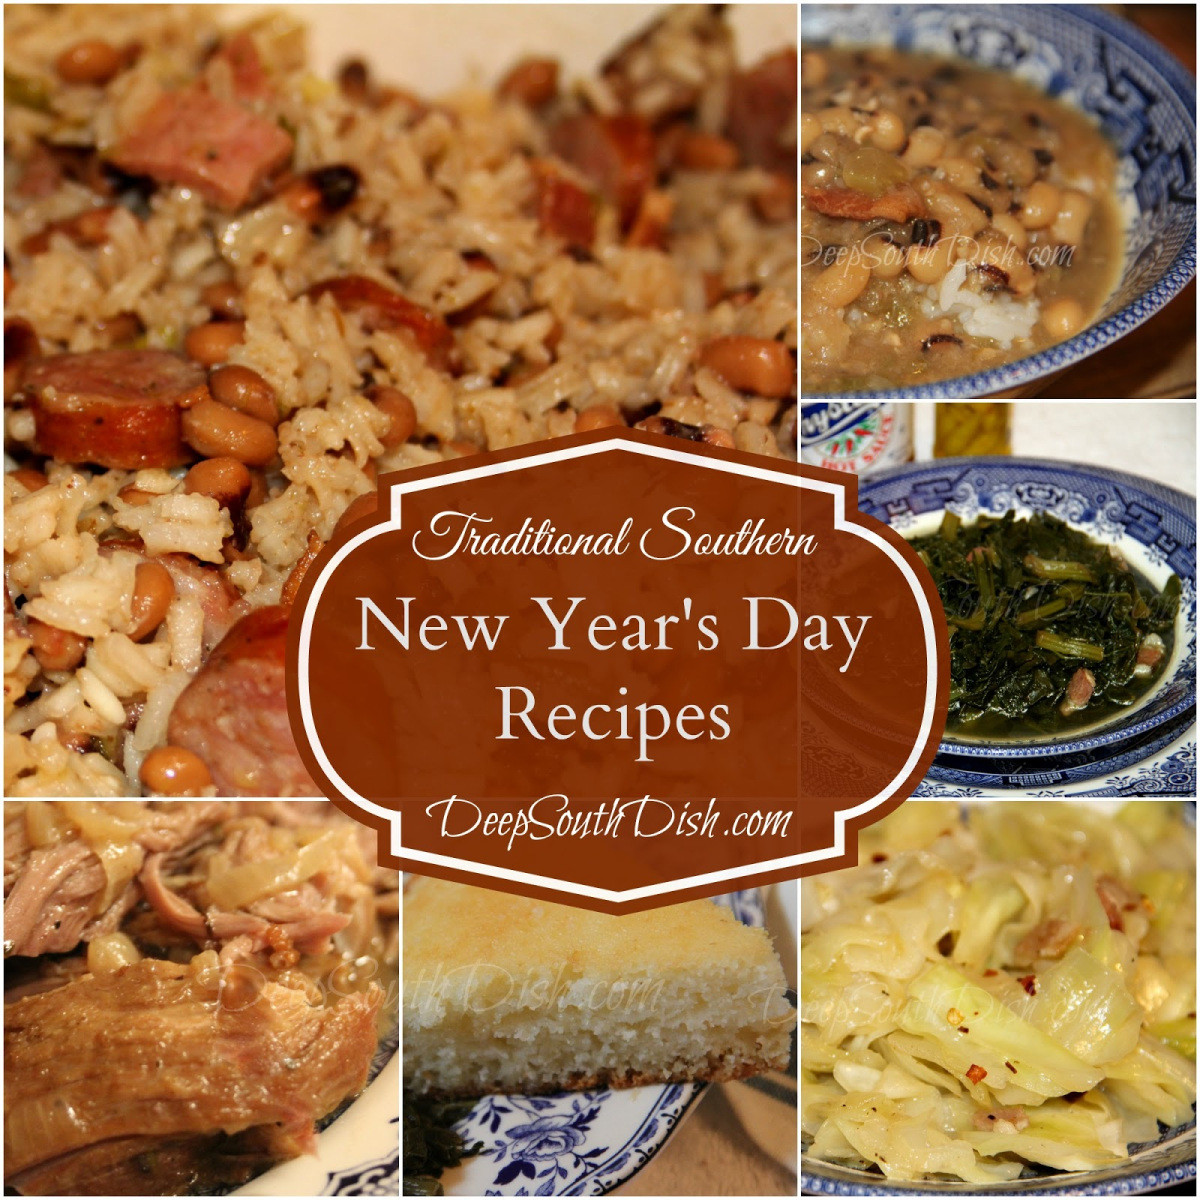 New Year Dinner Ideas
 PSA from CBT – New Year’s Day Food for the Residents of